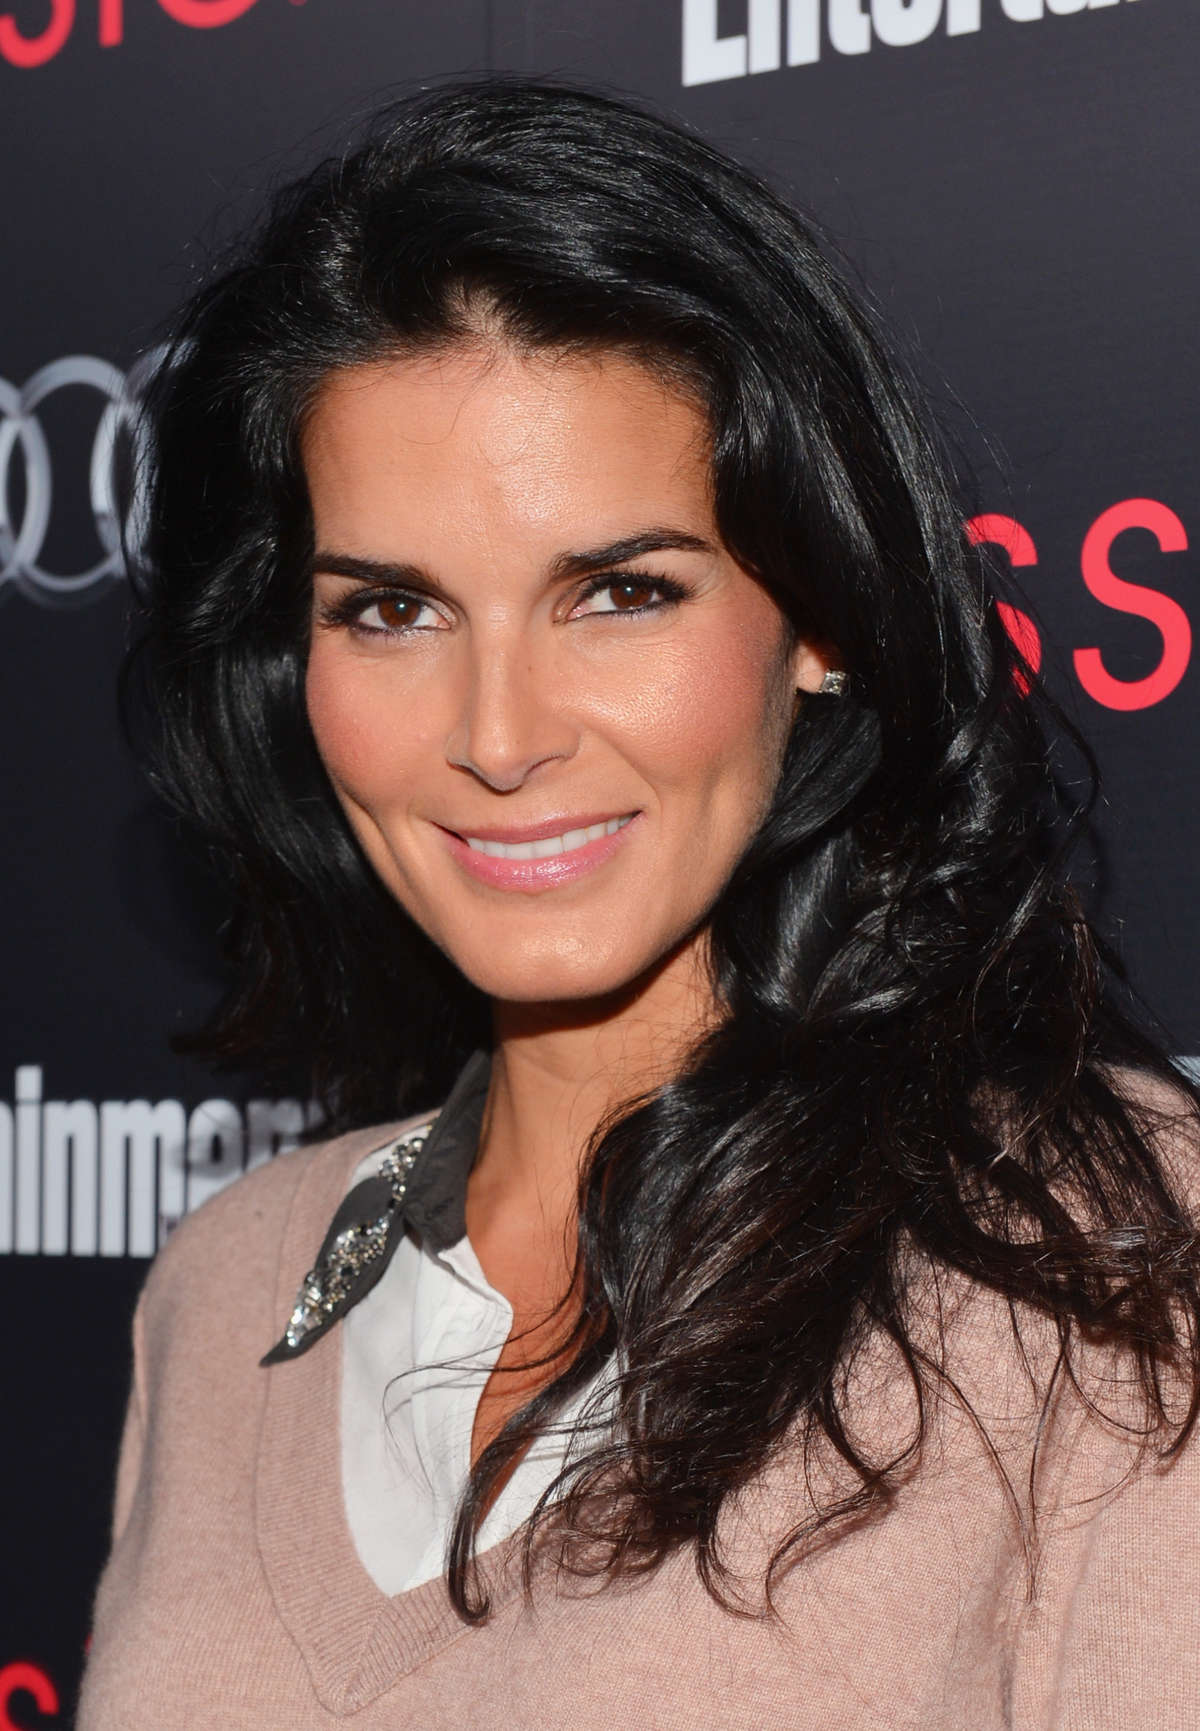 Angie Harmon 2013 : Angie Harmon In Leather Pants at EW Pre-SAG Party 2013 ...